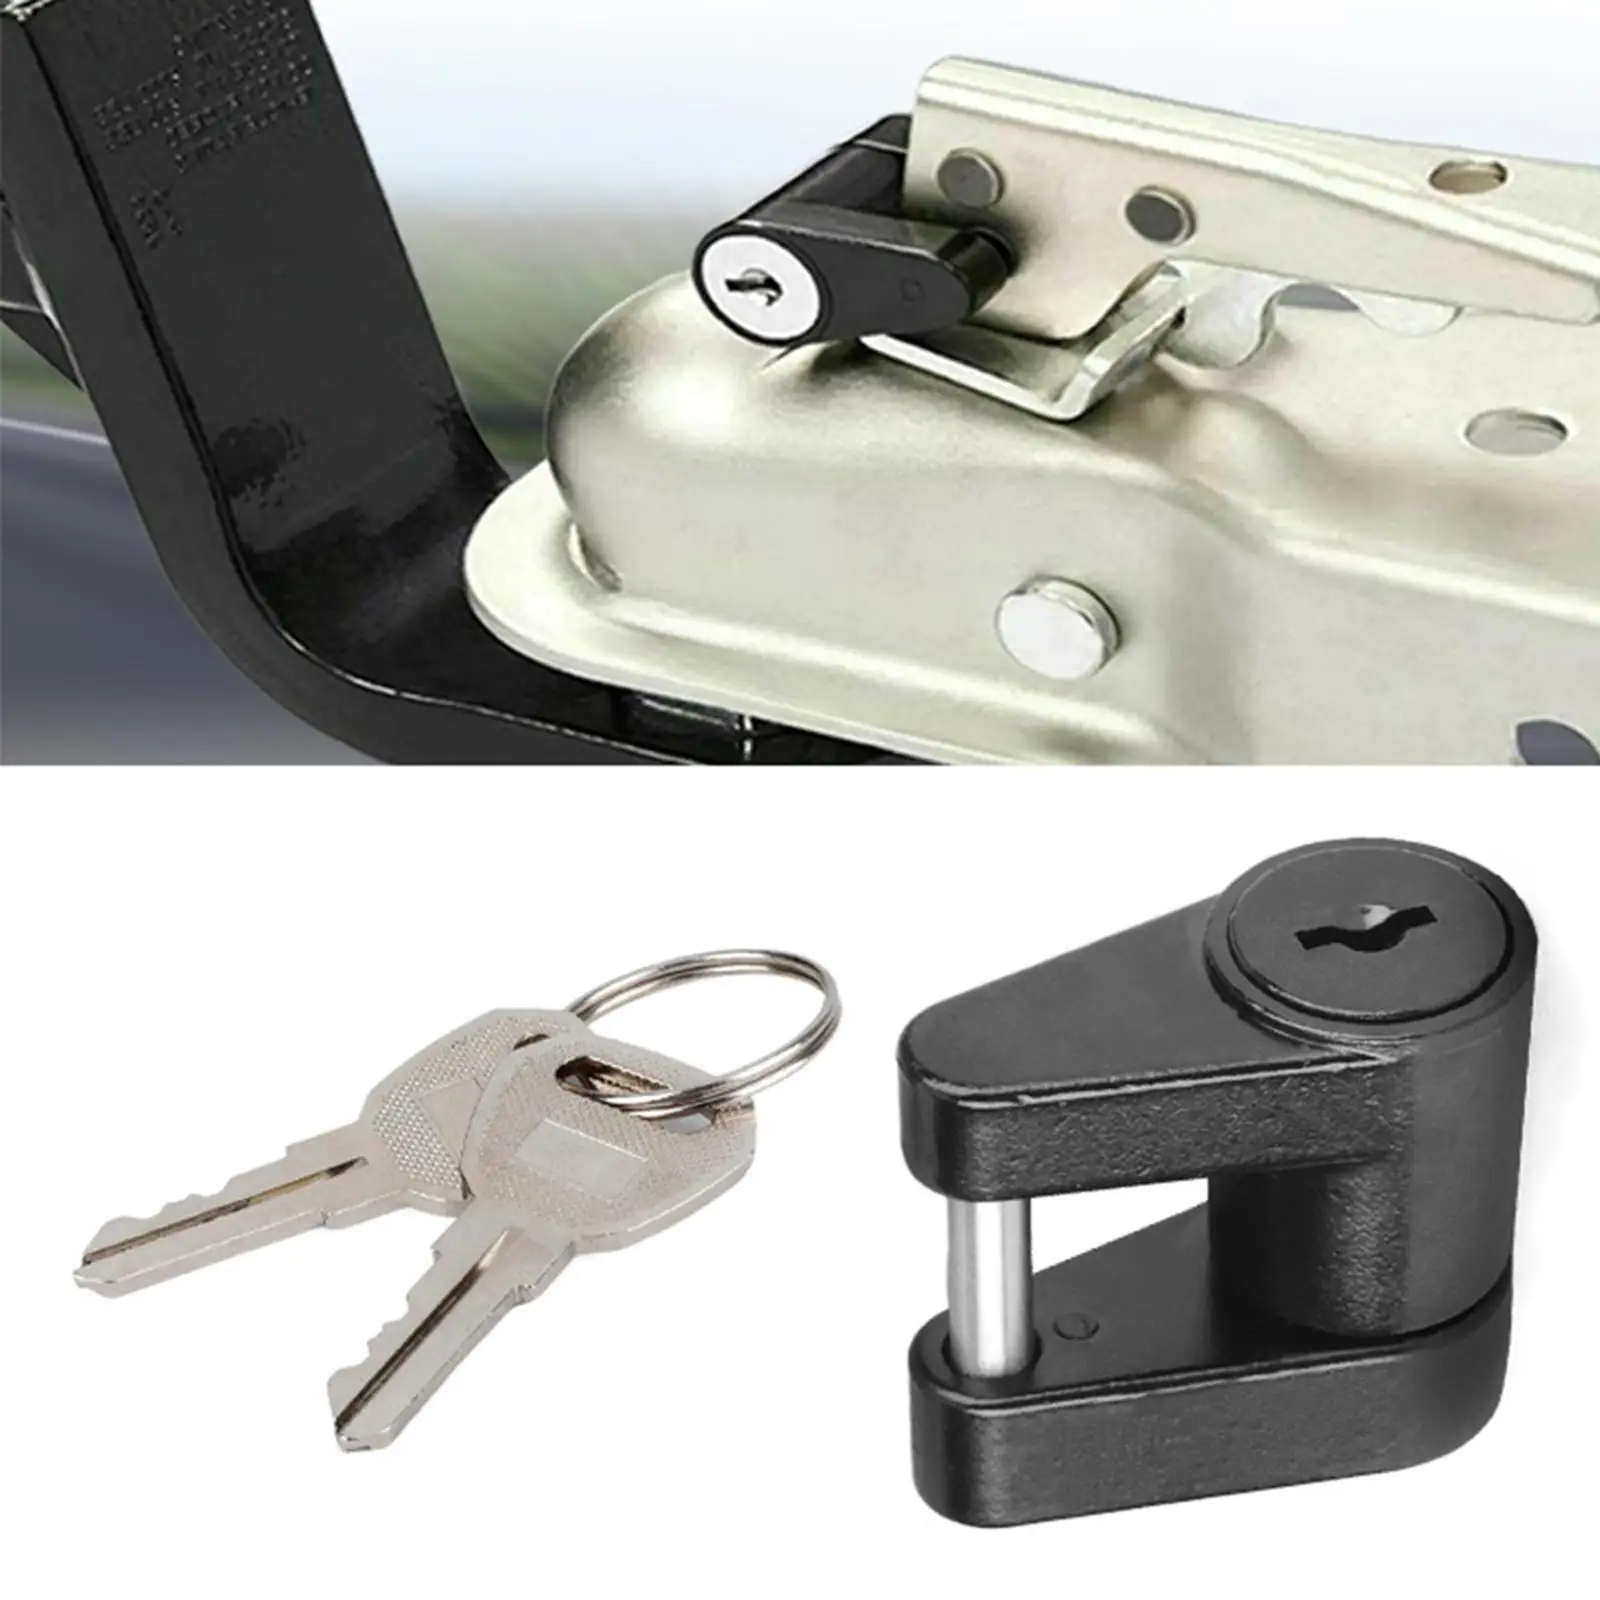 Trailer Hitch Coupler Lock with 2 Keys for Construction Vehicles Campers Car Coupling Lock